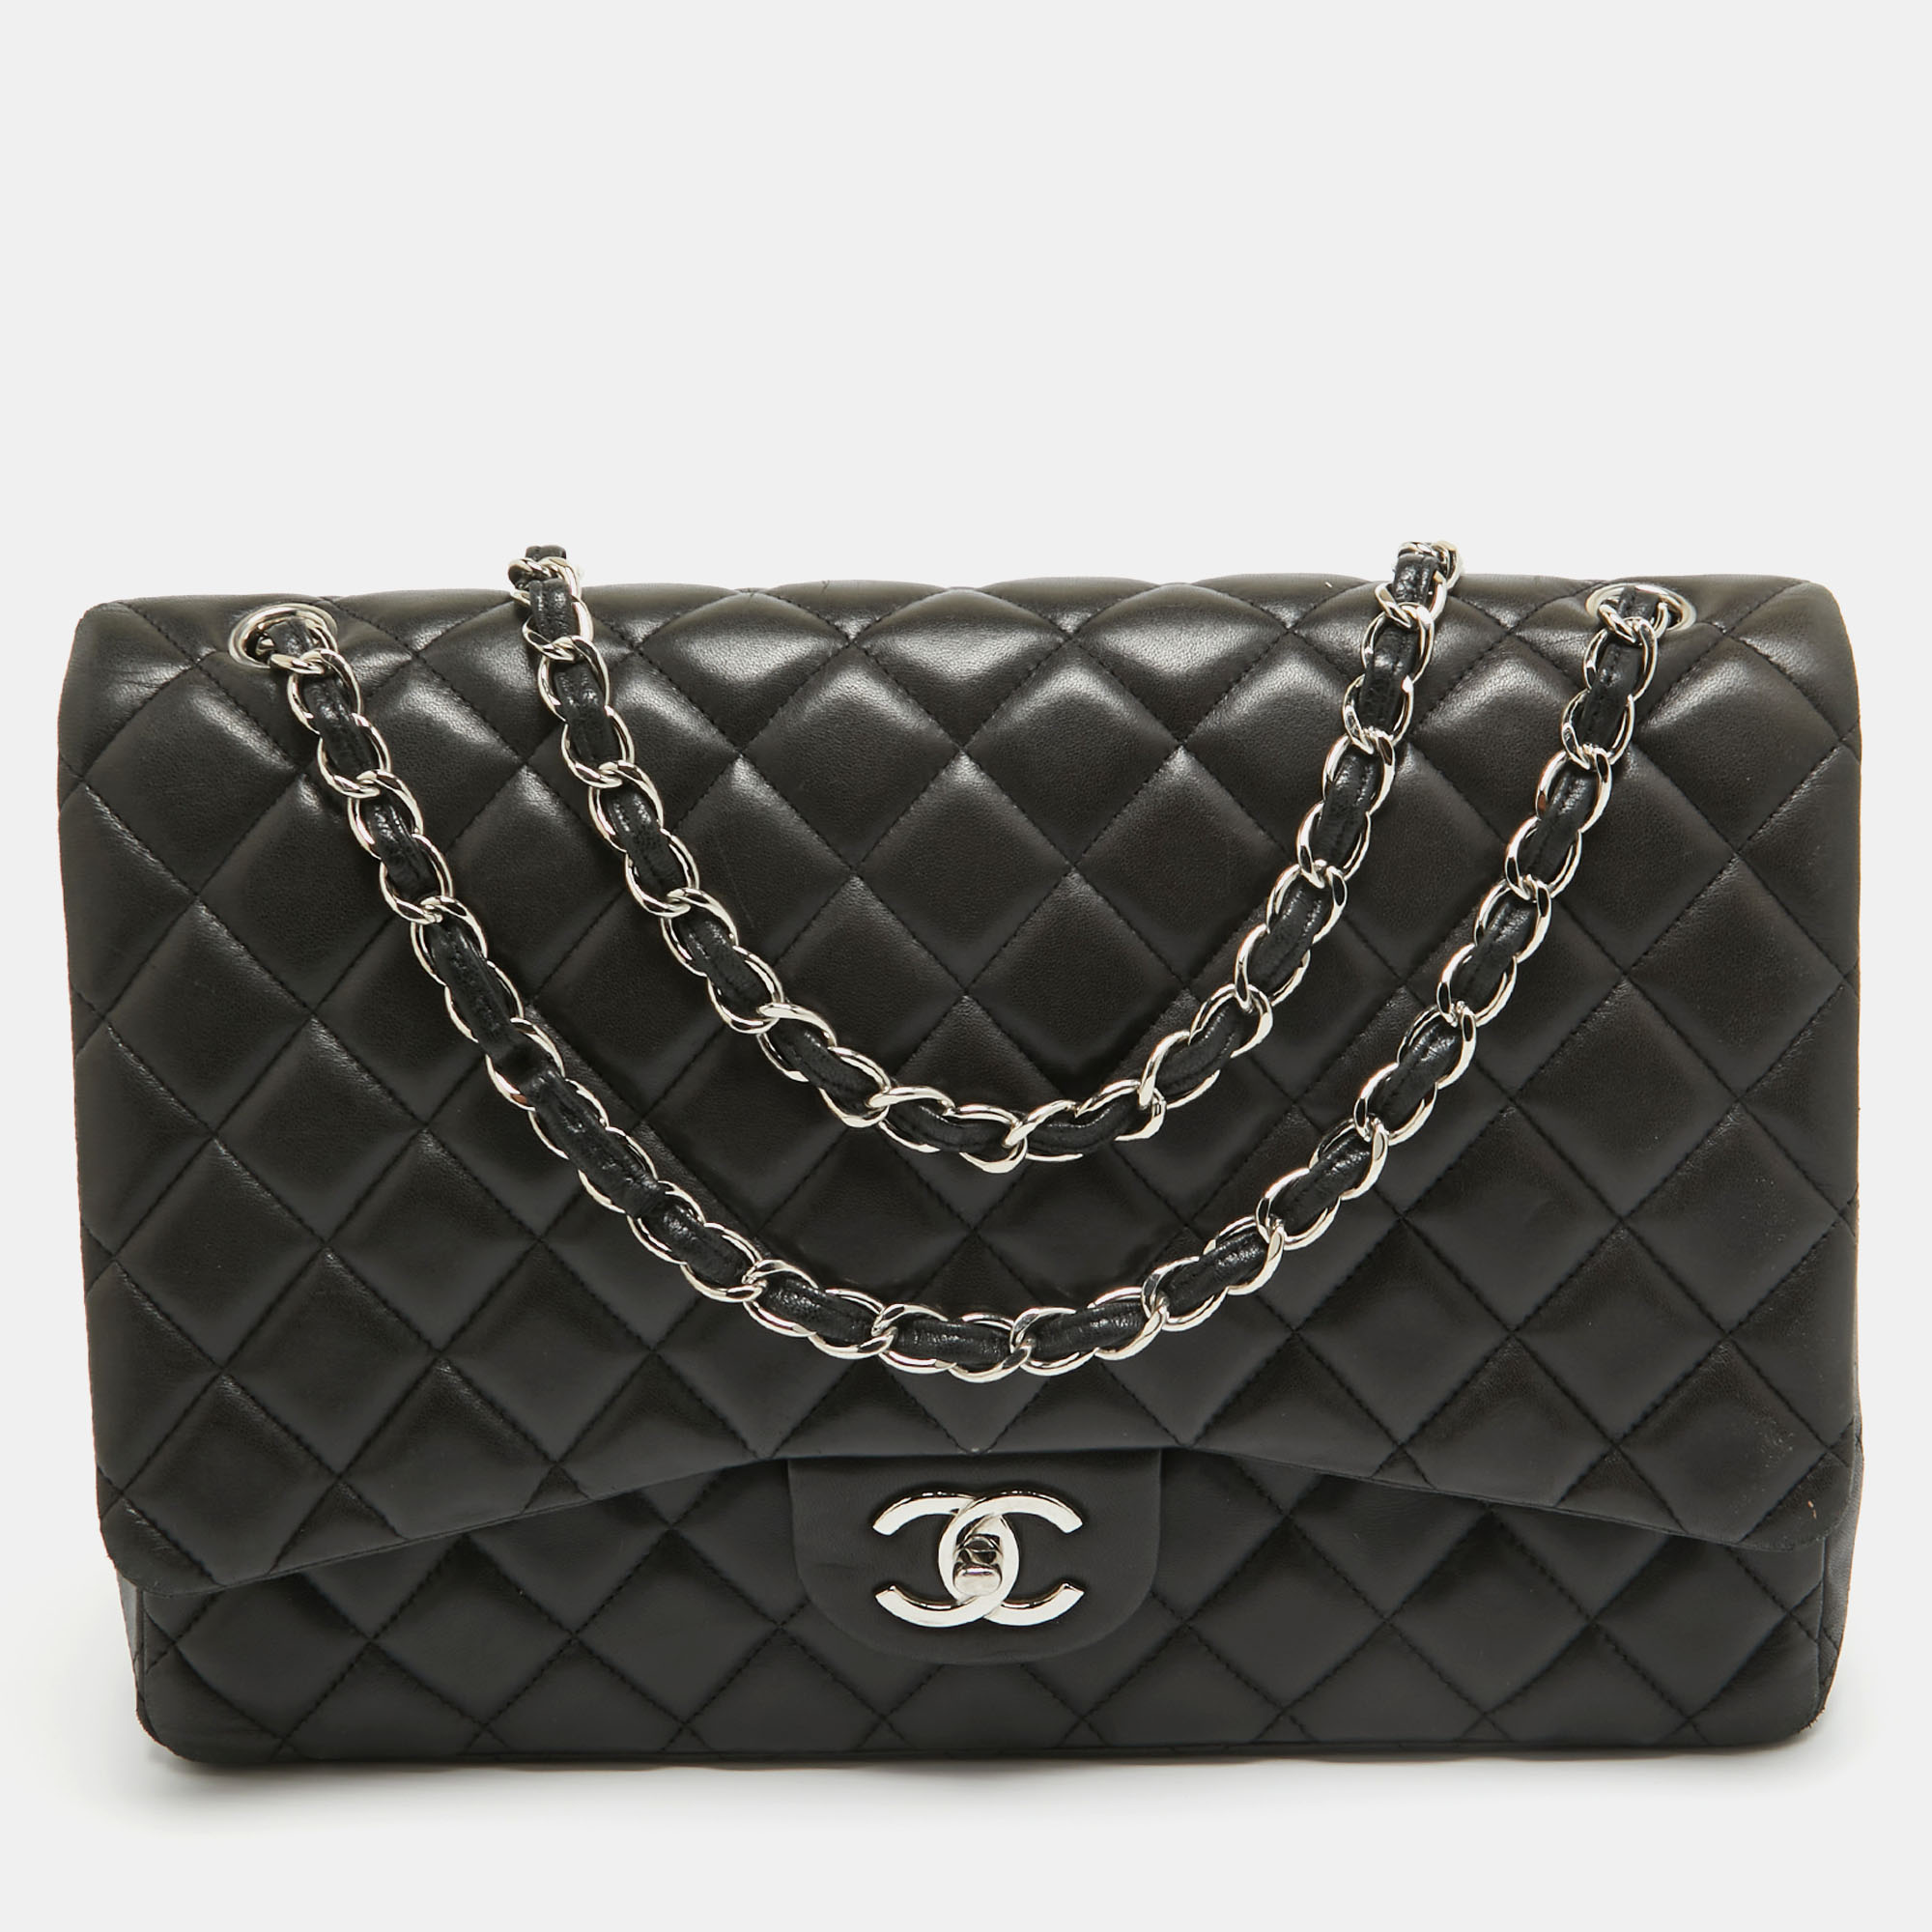 

Chanel Black Quilted Lambskin Leather Maxi Classic Double Flap Bag